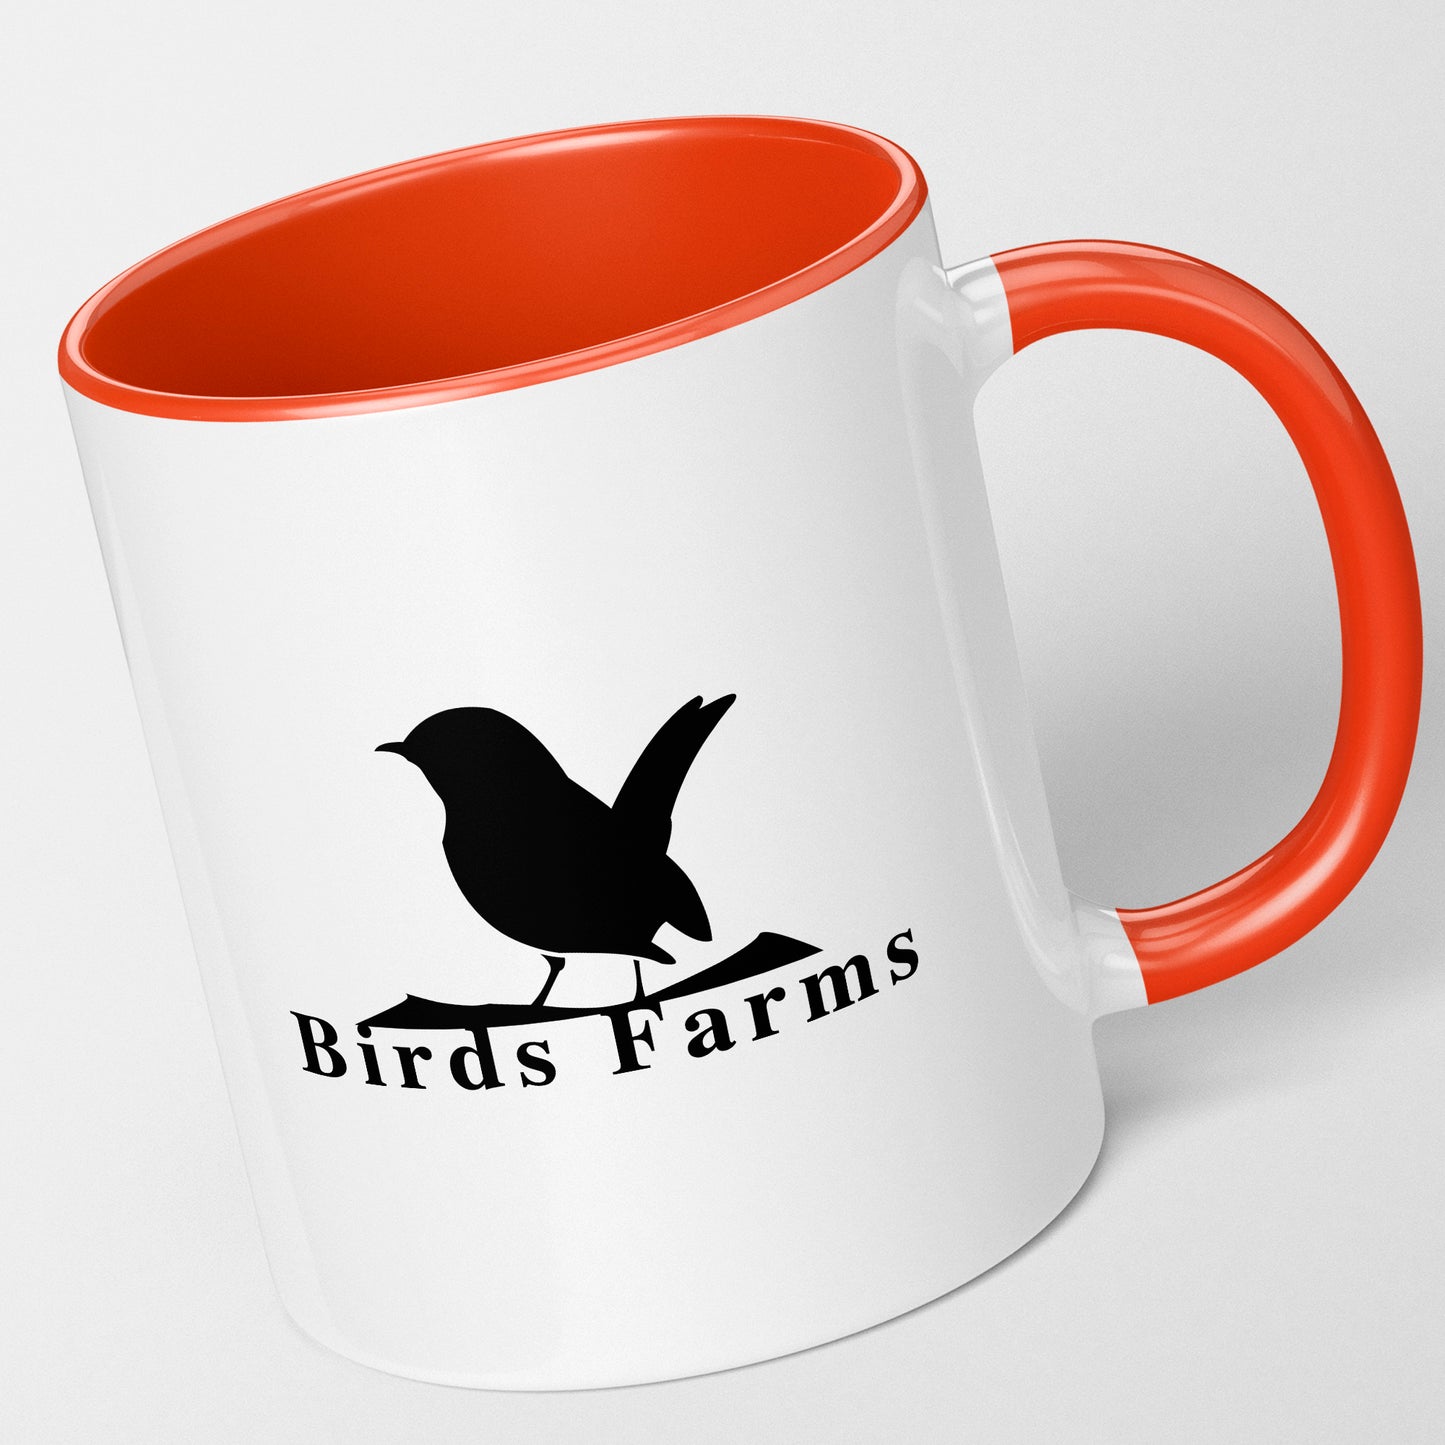 Branded Mugs (ORANGE) - Fully Inclusive Pricing Full Colour Both Sides &  Free Delivery